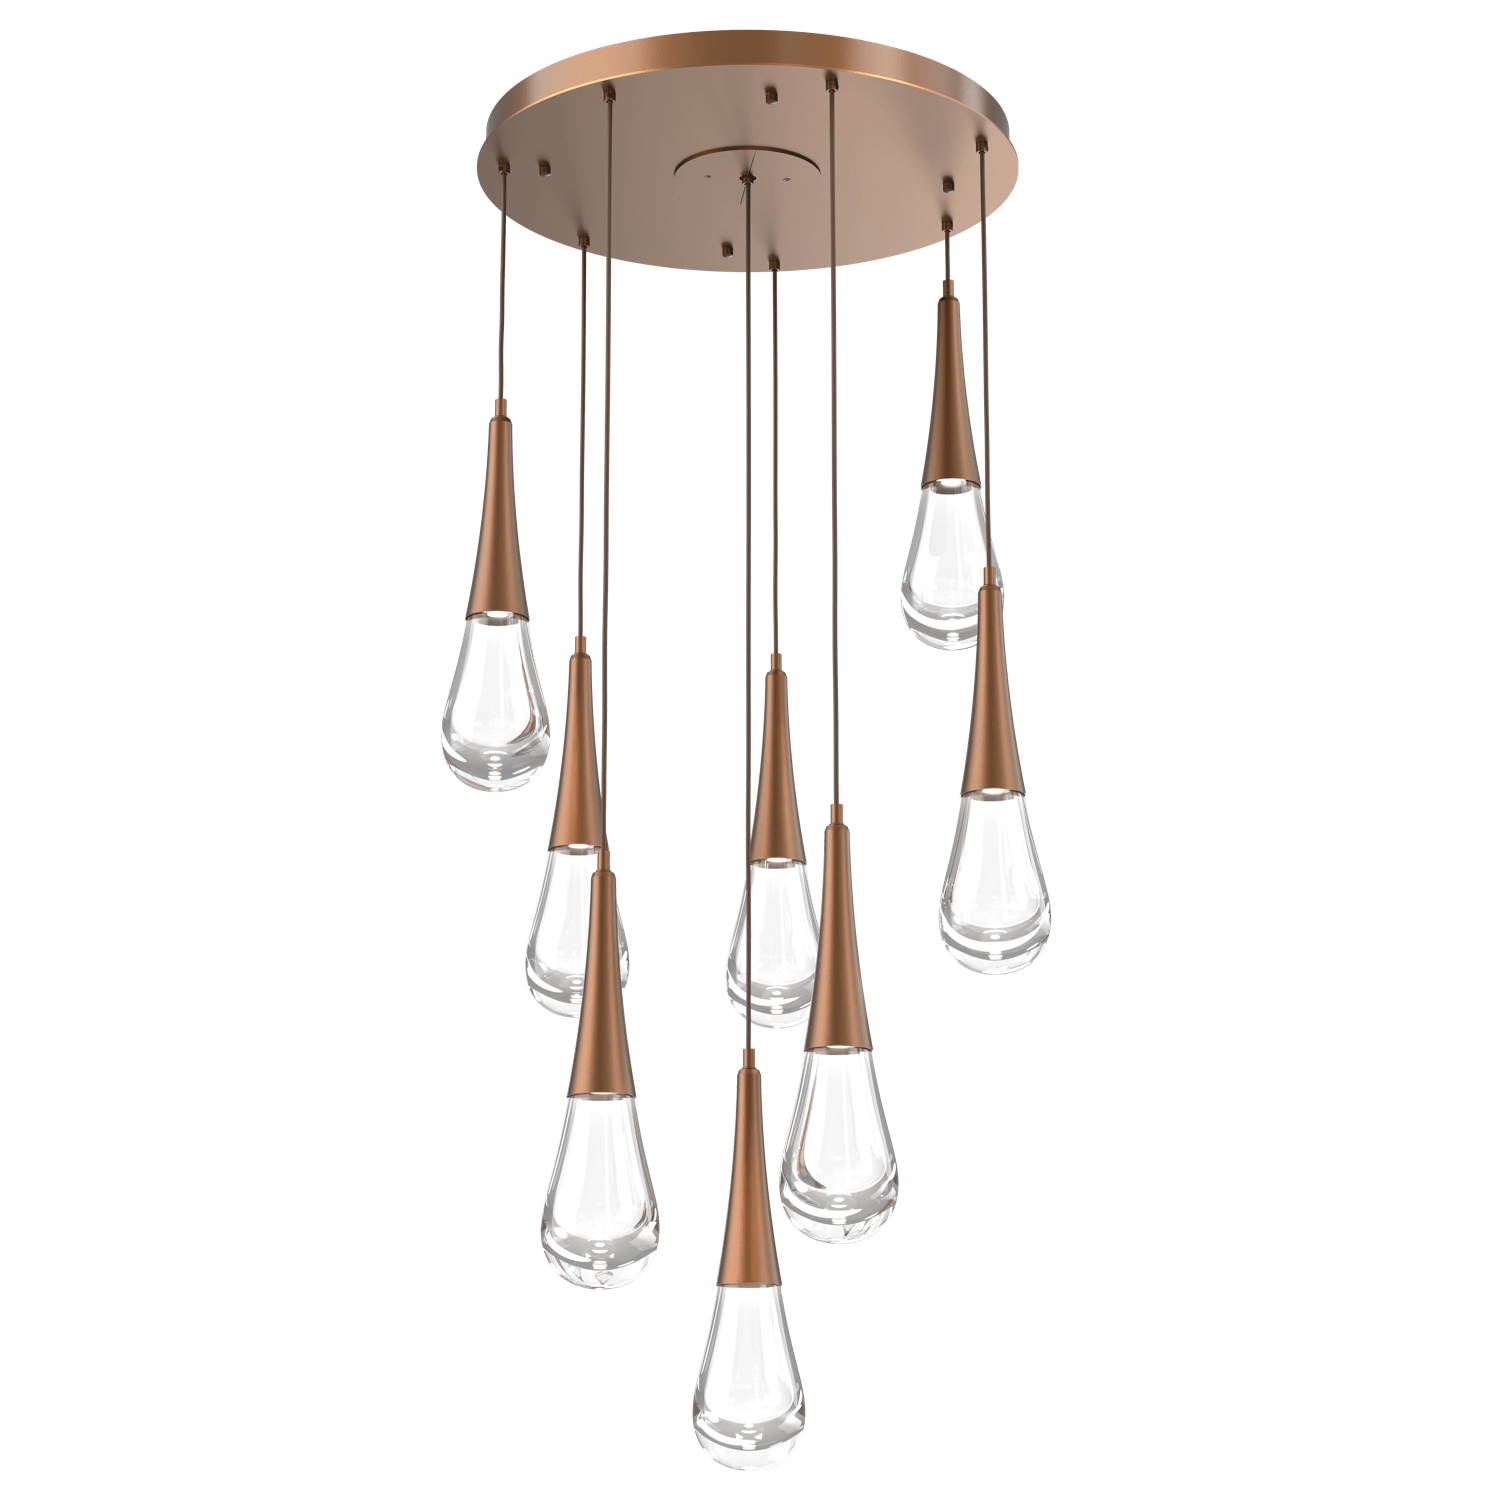 CHB0078-08-BB-Hammerton-Studio-Raindrop-8-light-round-pendant-chandelier-with-burnished-bronze-finish-and-clear-blown-glass-shades-and-LED-lamping